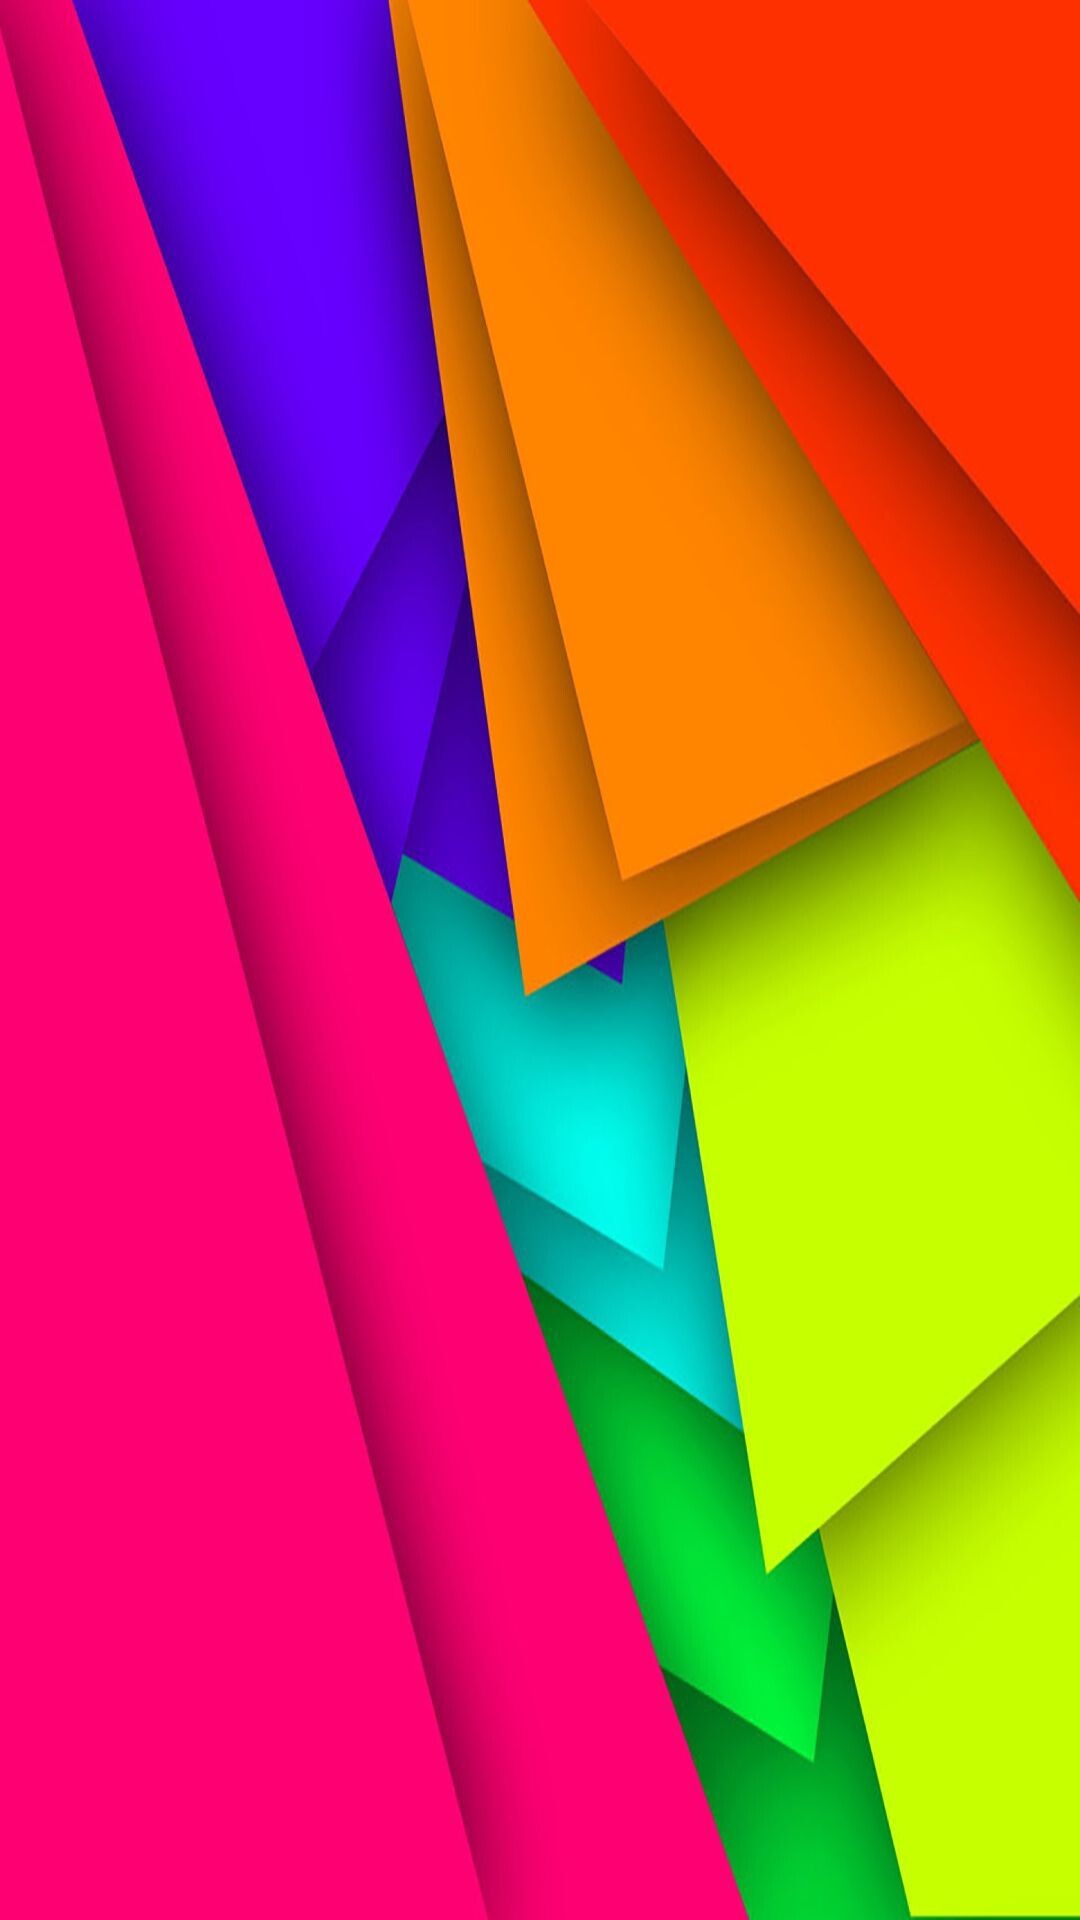 Geometric Abstract: Colorful, Acute angles, Intersecting lines. 1080x1920 Full HD Wallpaper.